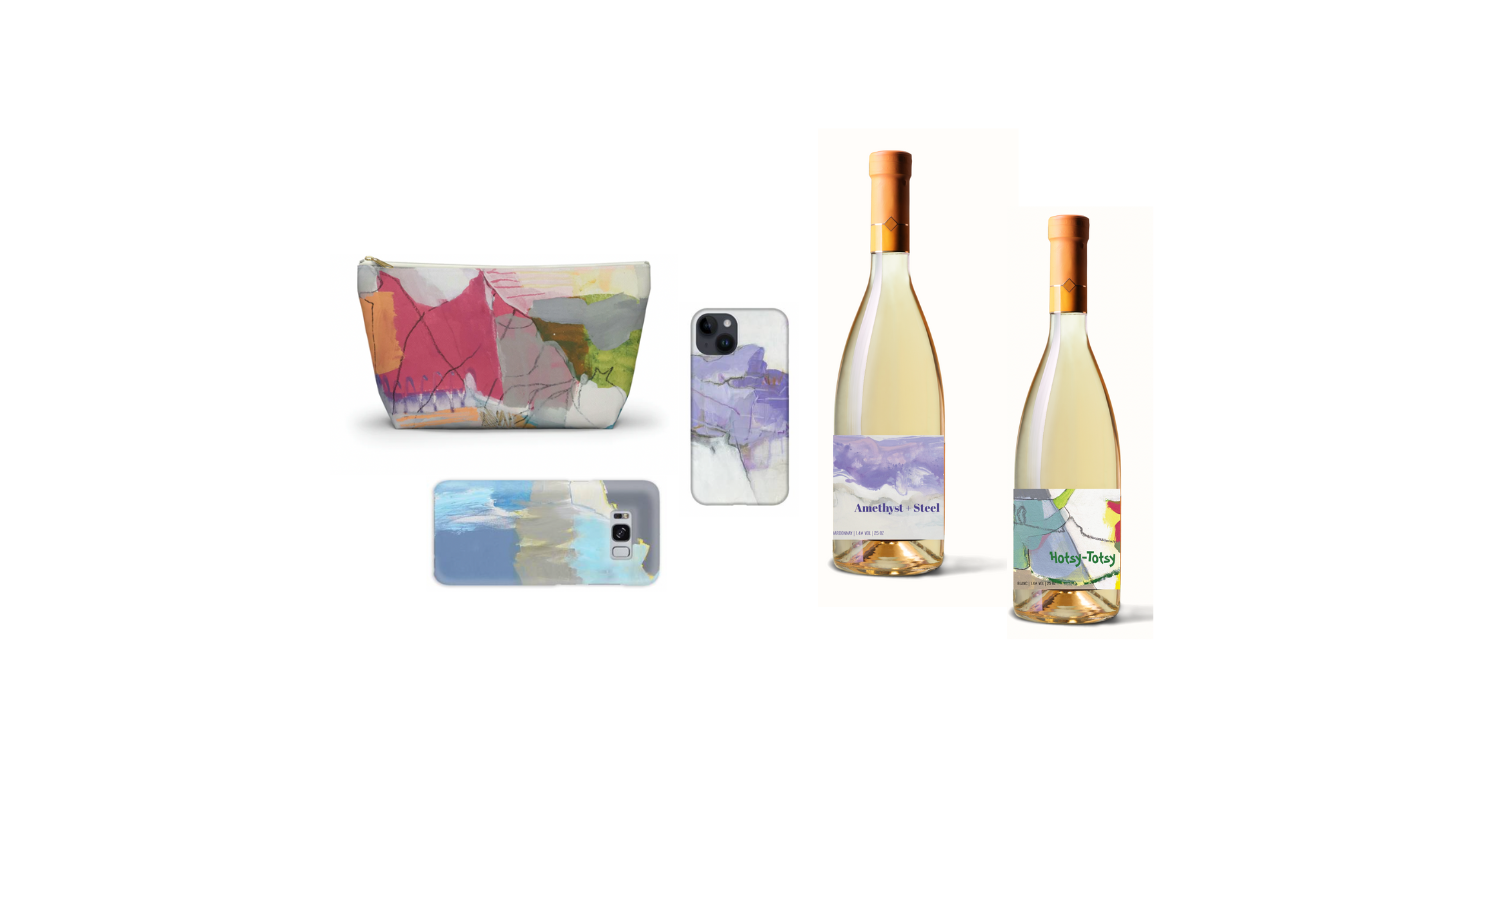 Products branding and packaging featuring abstract art by Mary Elizabeth. Direct art image licensing available.